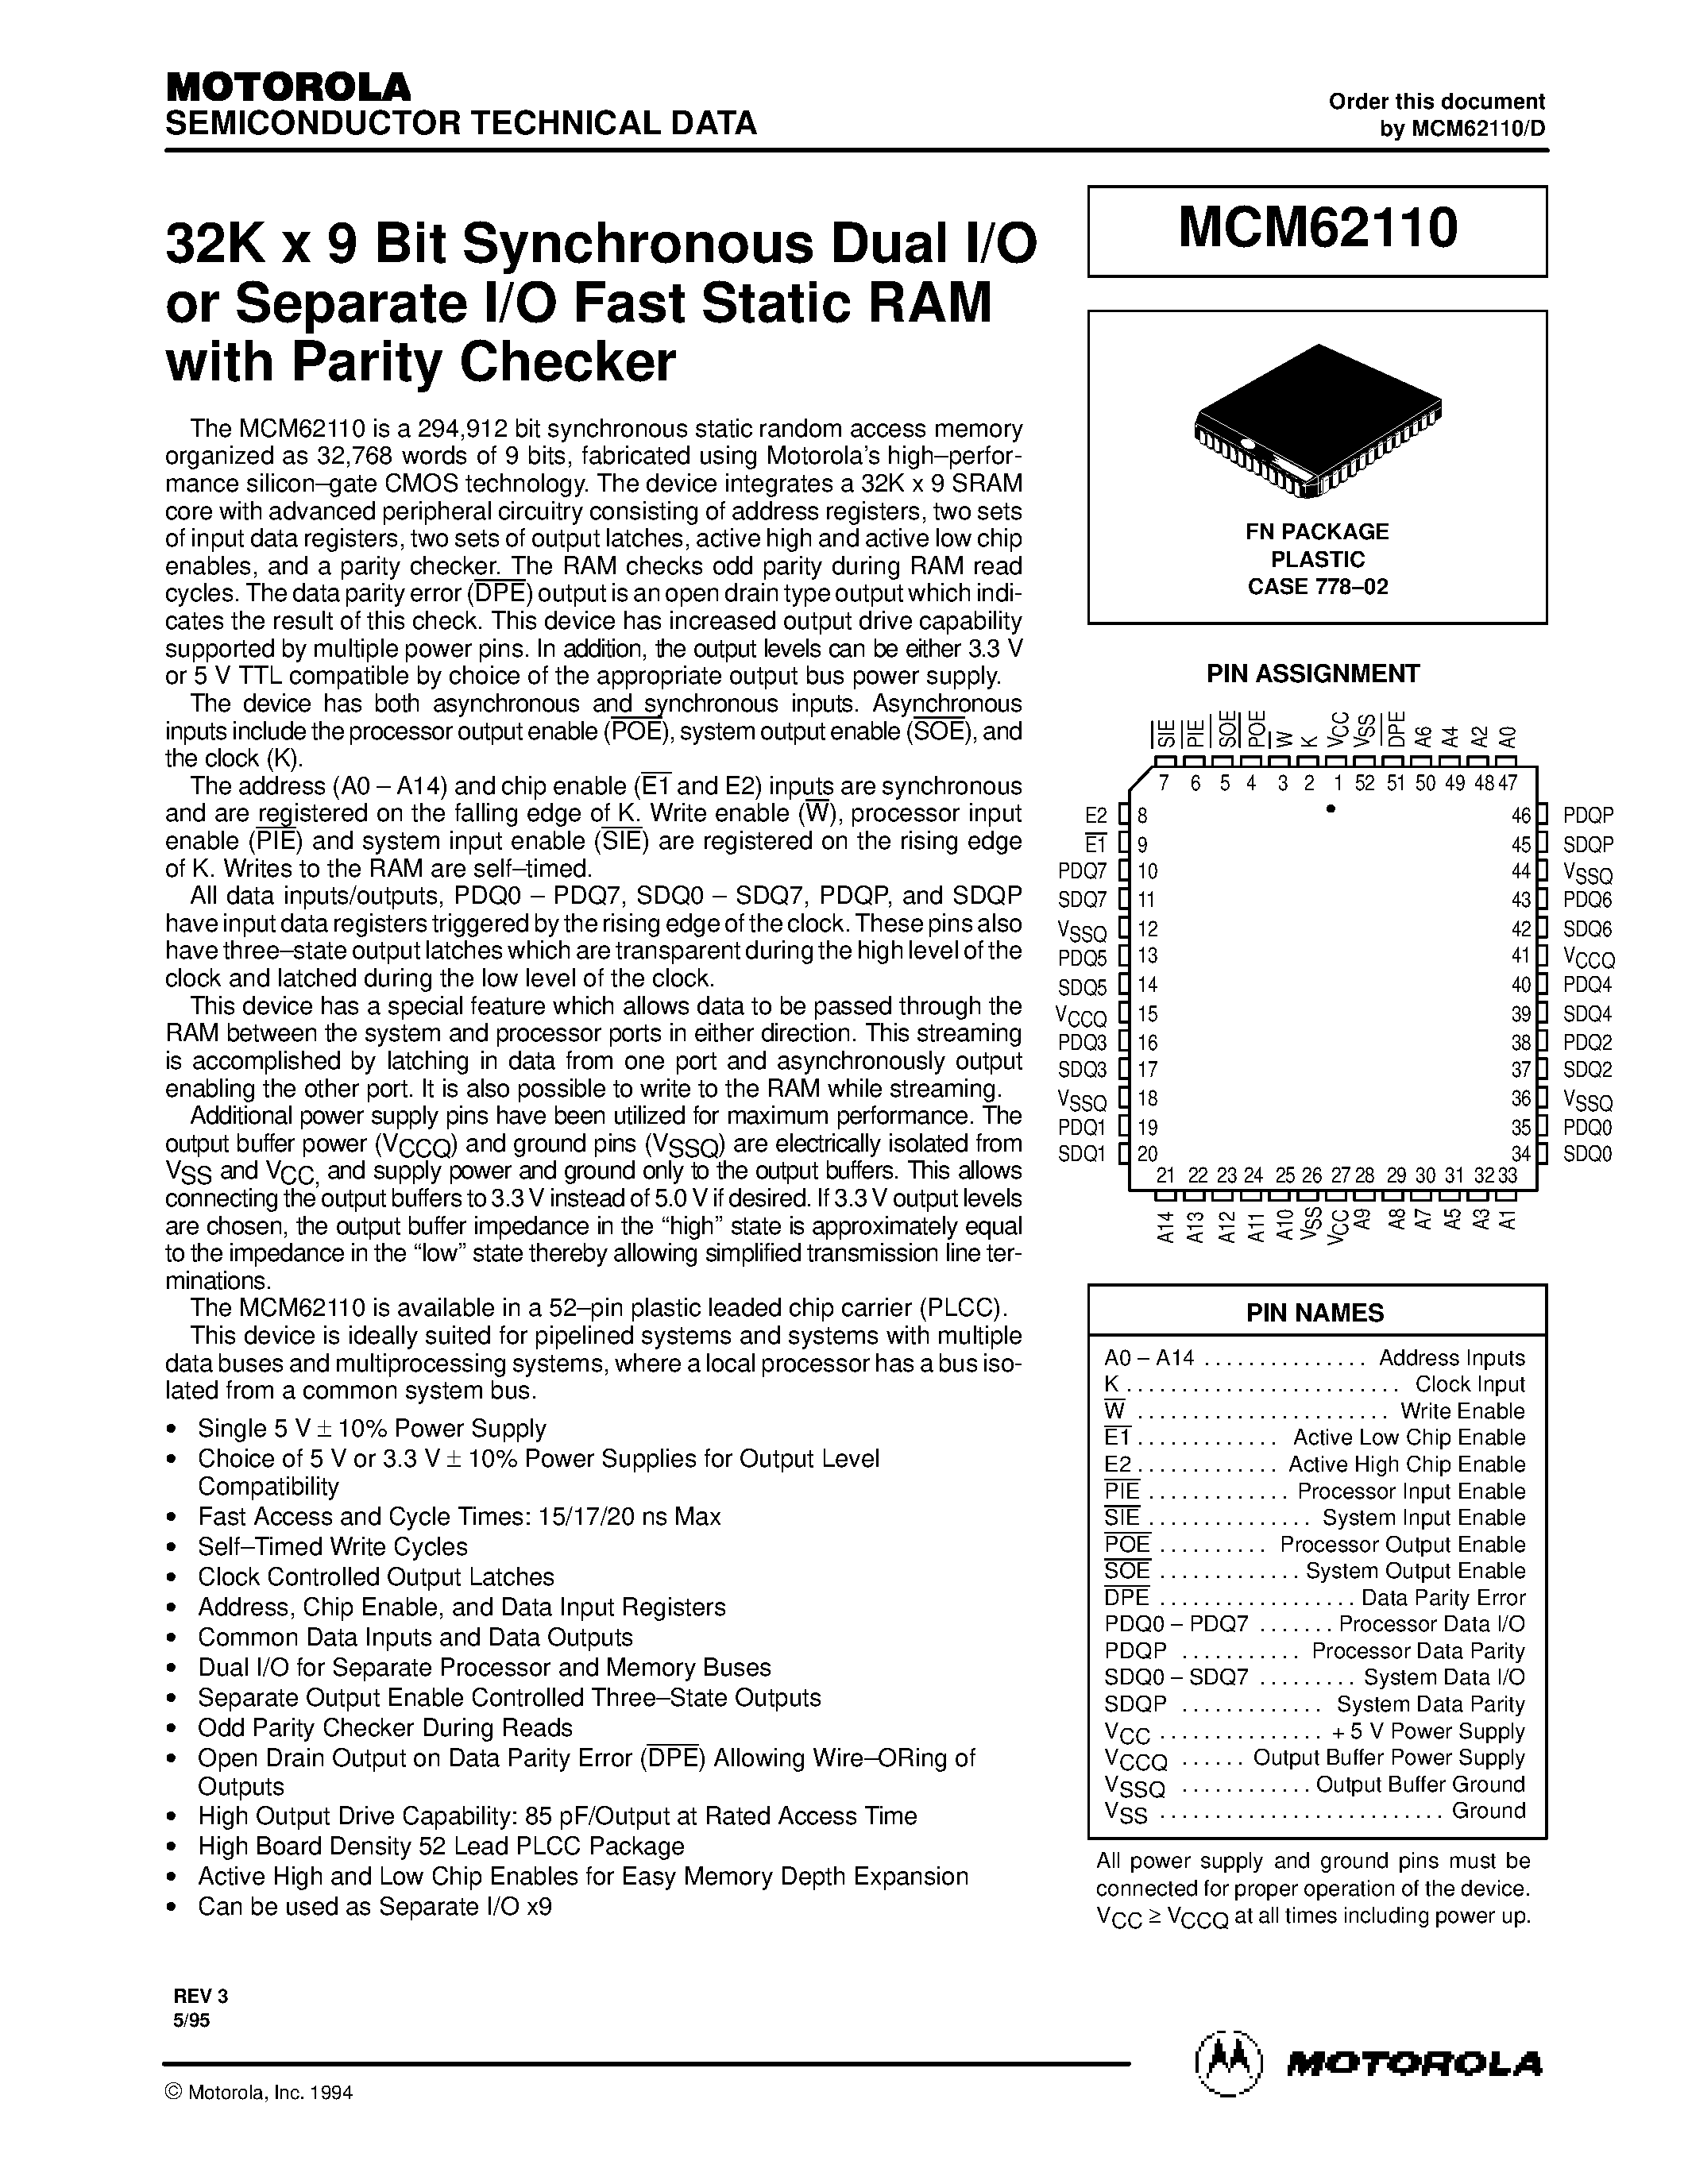 Datasheet MCM62110FN20 - 32K x 9 Bit Synchronous Dual I/O or Separate I/O Fast Static RAM with Parity Checker page 1